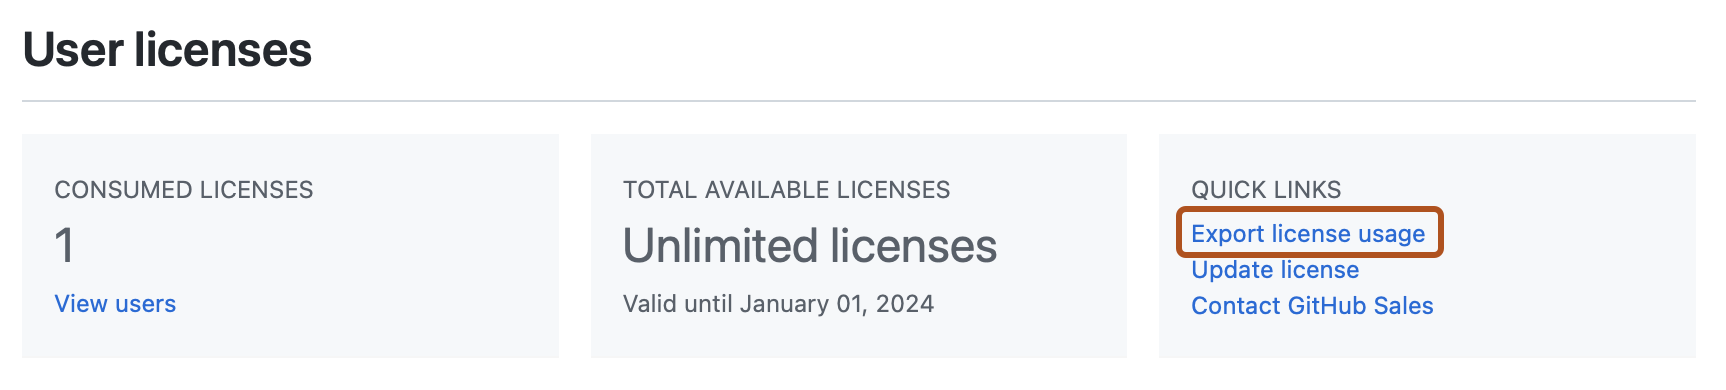 Screenshot of the "User licenses" section of the "License" page. A link, labeled "Export license usage", is outlined in dark orange.